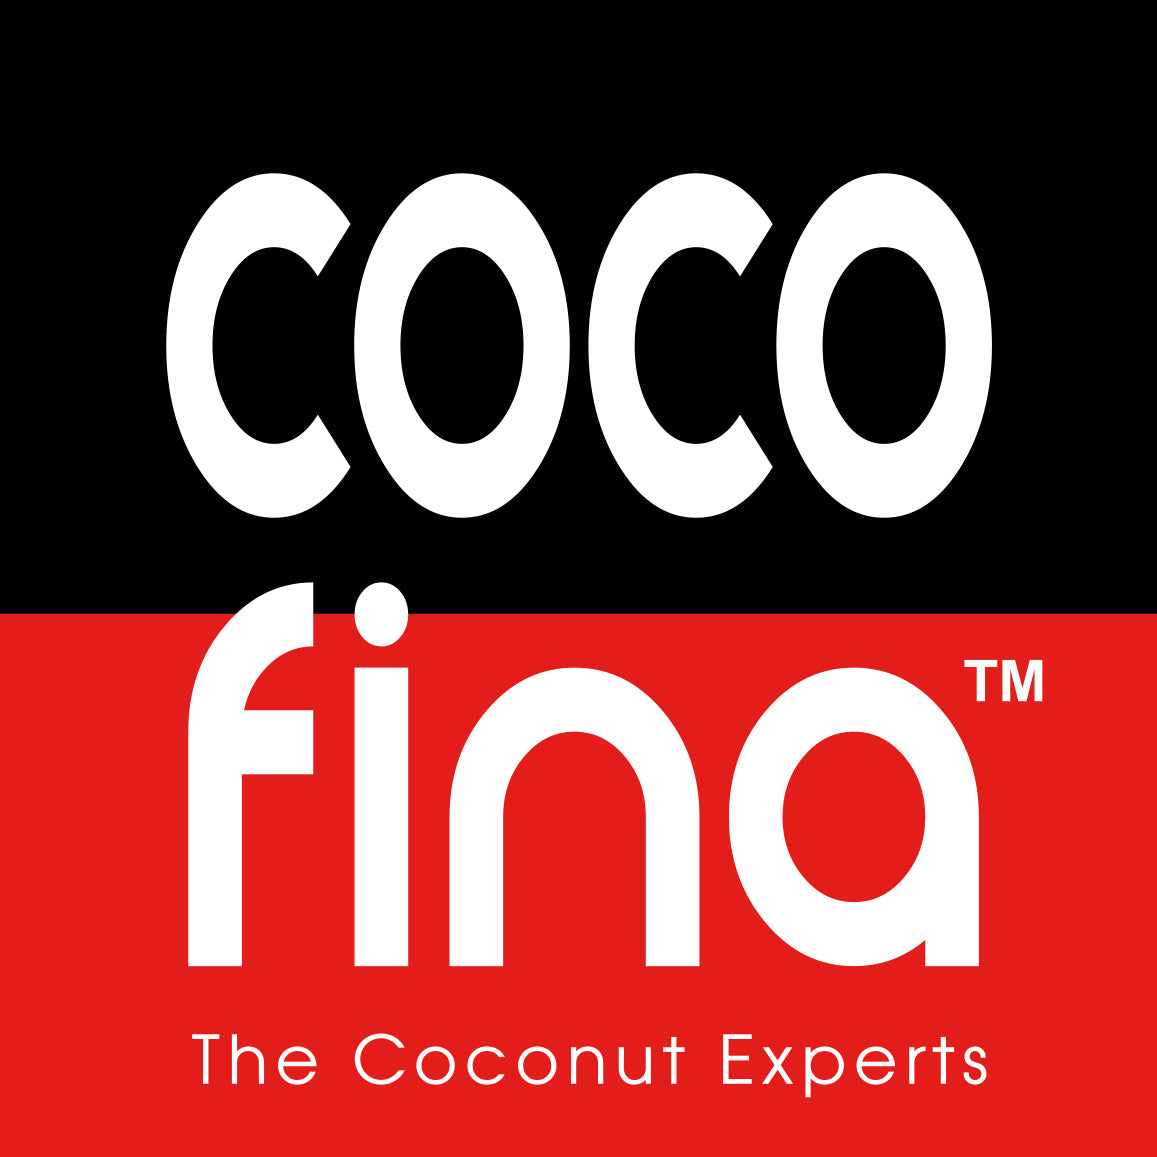 NOT JUST A BRAND NAME! WHY 'COCOFINA'?